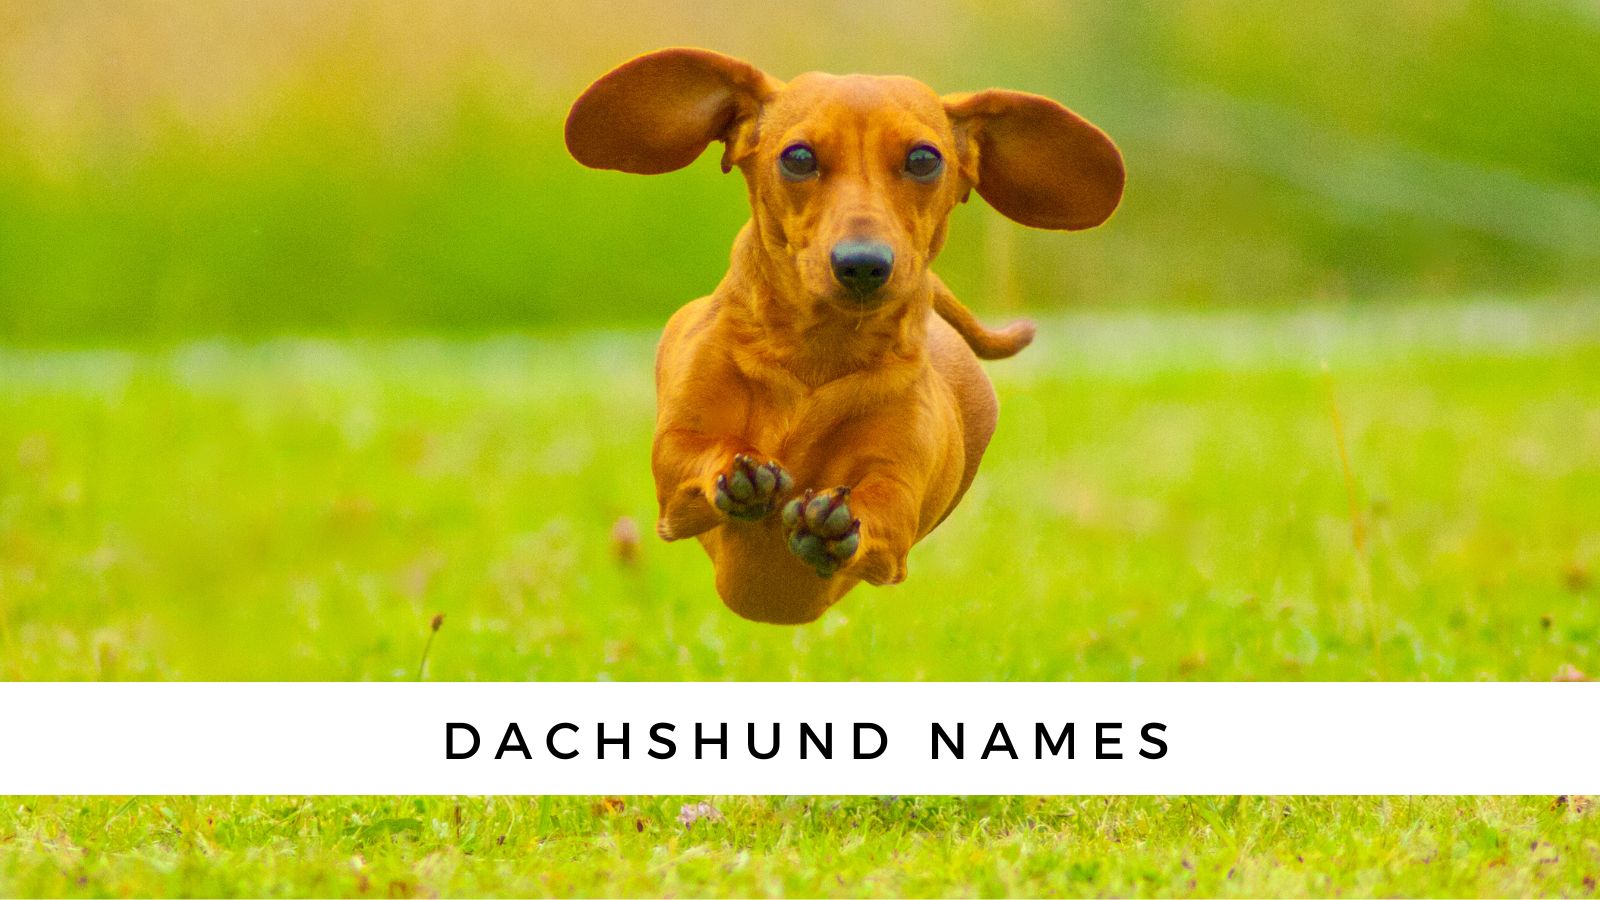 are dachshunds used as us military dogs